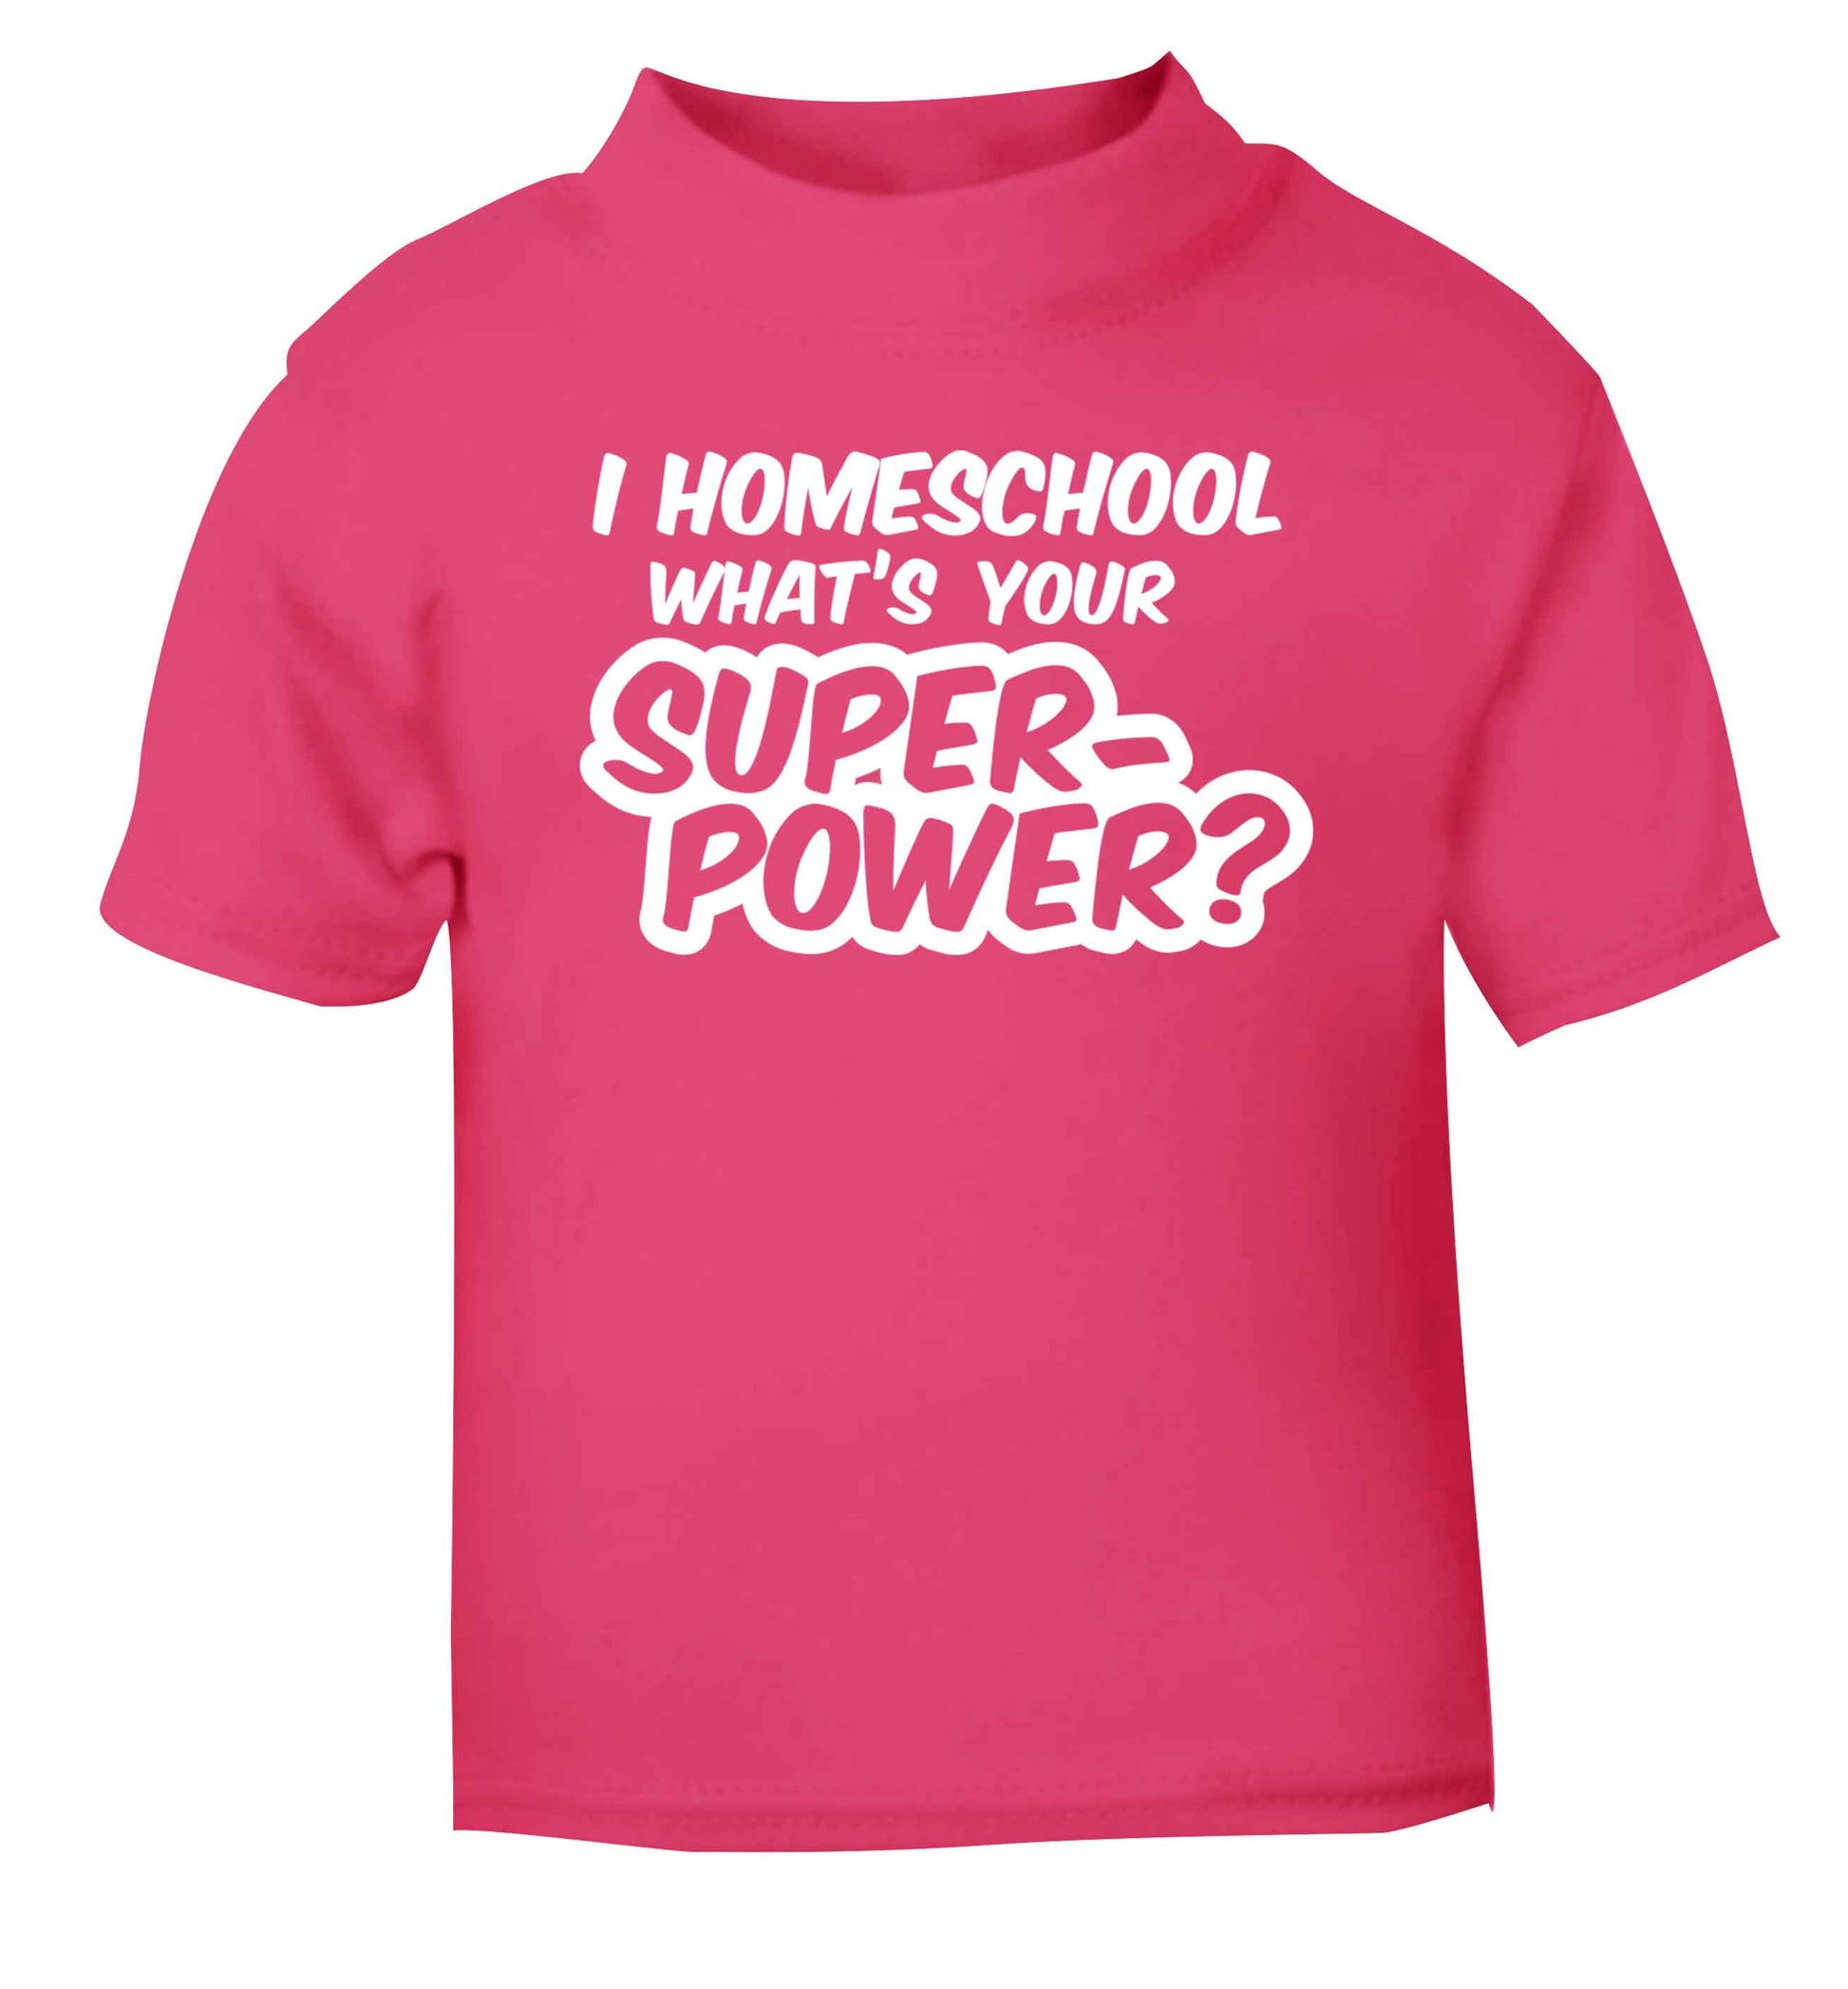 I homeschool what's your superpower? pink Baby Toddler Tshirt 2 Years